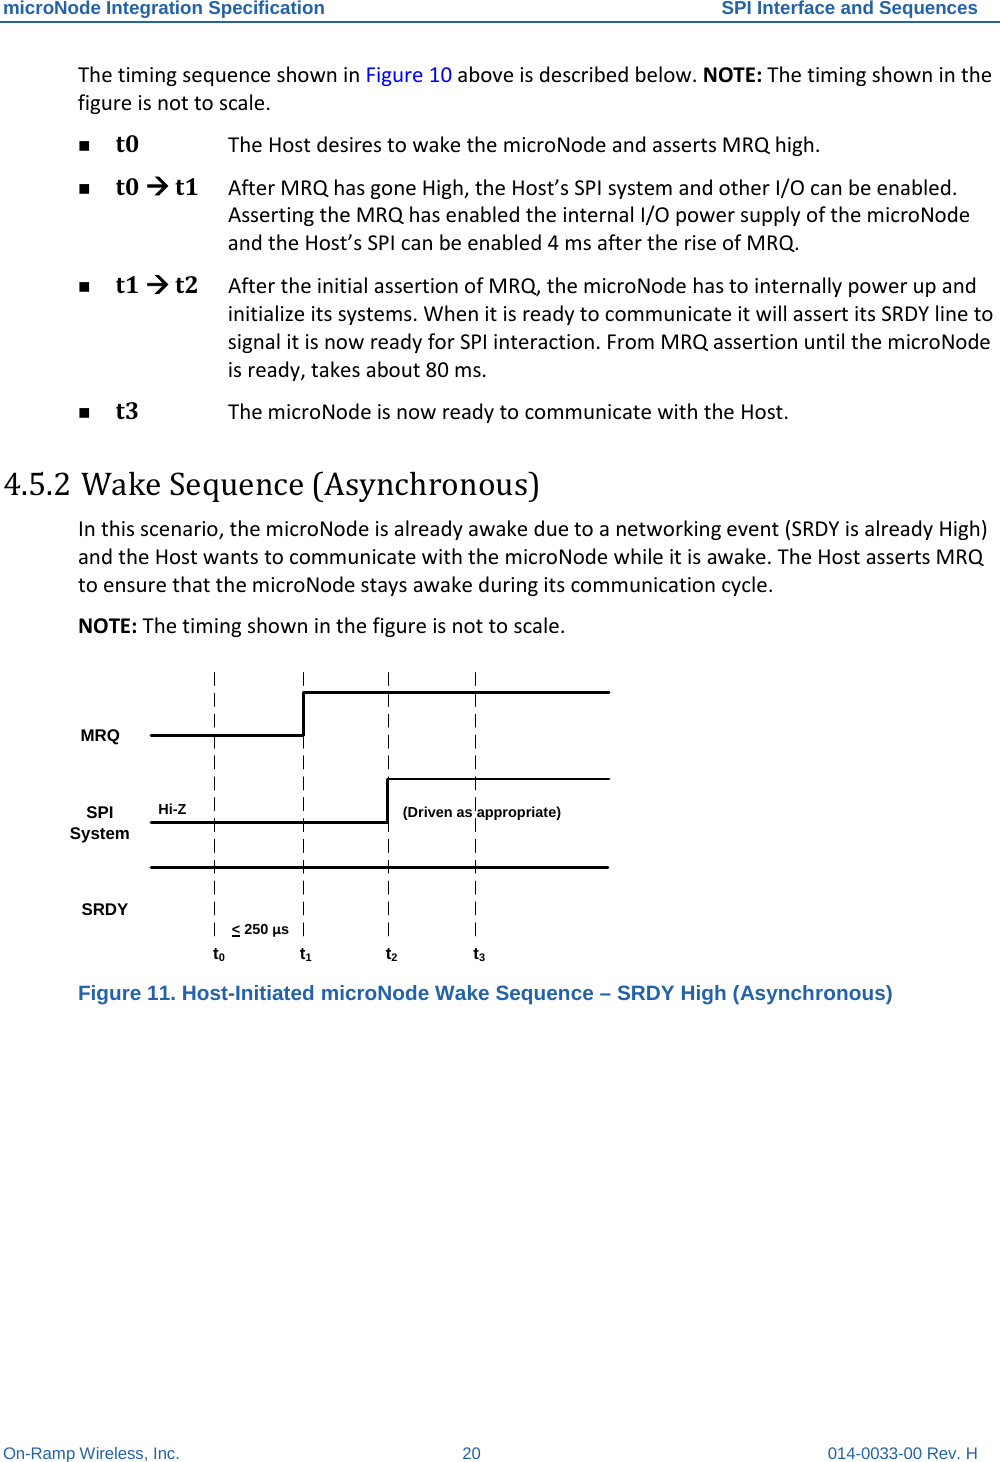 microNode Integration Specification SPI Interface and Sequences On-Ramp Wireless, Inc. 20 014-0033-00 Rev. H The timing sequence shown in Figure 10 above is described below. NOTE: The timing shown in the figure is not to scale.  t0 The Host desires to wake the microNode and asserts MRQ high.  t0  t1 After MRQ has gone High, the Host’s SPI system and other I/O can be enabled. Asserting the MRQ has enabled the internal I/O power supply of the microNode and the Host’s SPI can be enabled 4 ms after the rise of MRQ.  t1  t2 After the initial assertion of MRQ, the microNode has to internally power up and initialize its systems. When it is ready to communicate it will assert its SRDY line to signal it is now ready for SPI interaction. From MRQ assertion until the microNode is ready, takes about 80 ms.  t3 The microNode is now ready to communicate with the Host. 4.5.2 Wake Sequence (Asynchronous) In this scenario, the microNode is already awake due to a networking event (SRDY is already High) and the Host wants to communicate with the microNode while it is awake. The Host asserts MRQ to ensure that the microNode stays awake during its communication cycle. NOTE: The timing shown in the figure is not to scale.  t0t1t2t3SRDYSPI SystemMRQHi-Z (Driven as appropriate)&lt; 250 μs Figure 11. Host-Initiated microNode Wake Sequence – SRDY High (Asynchronous) 